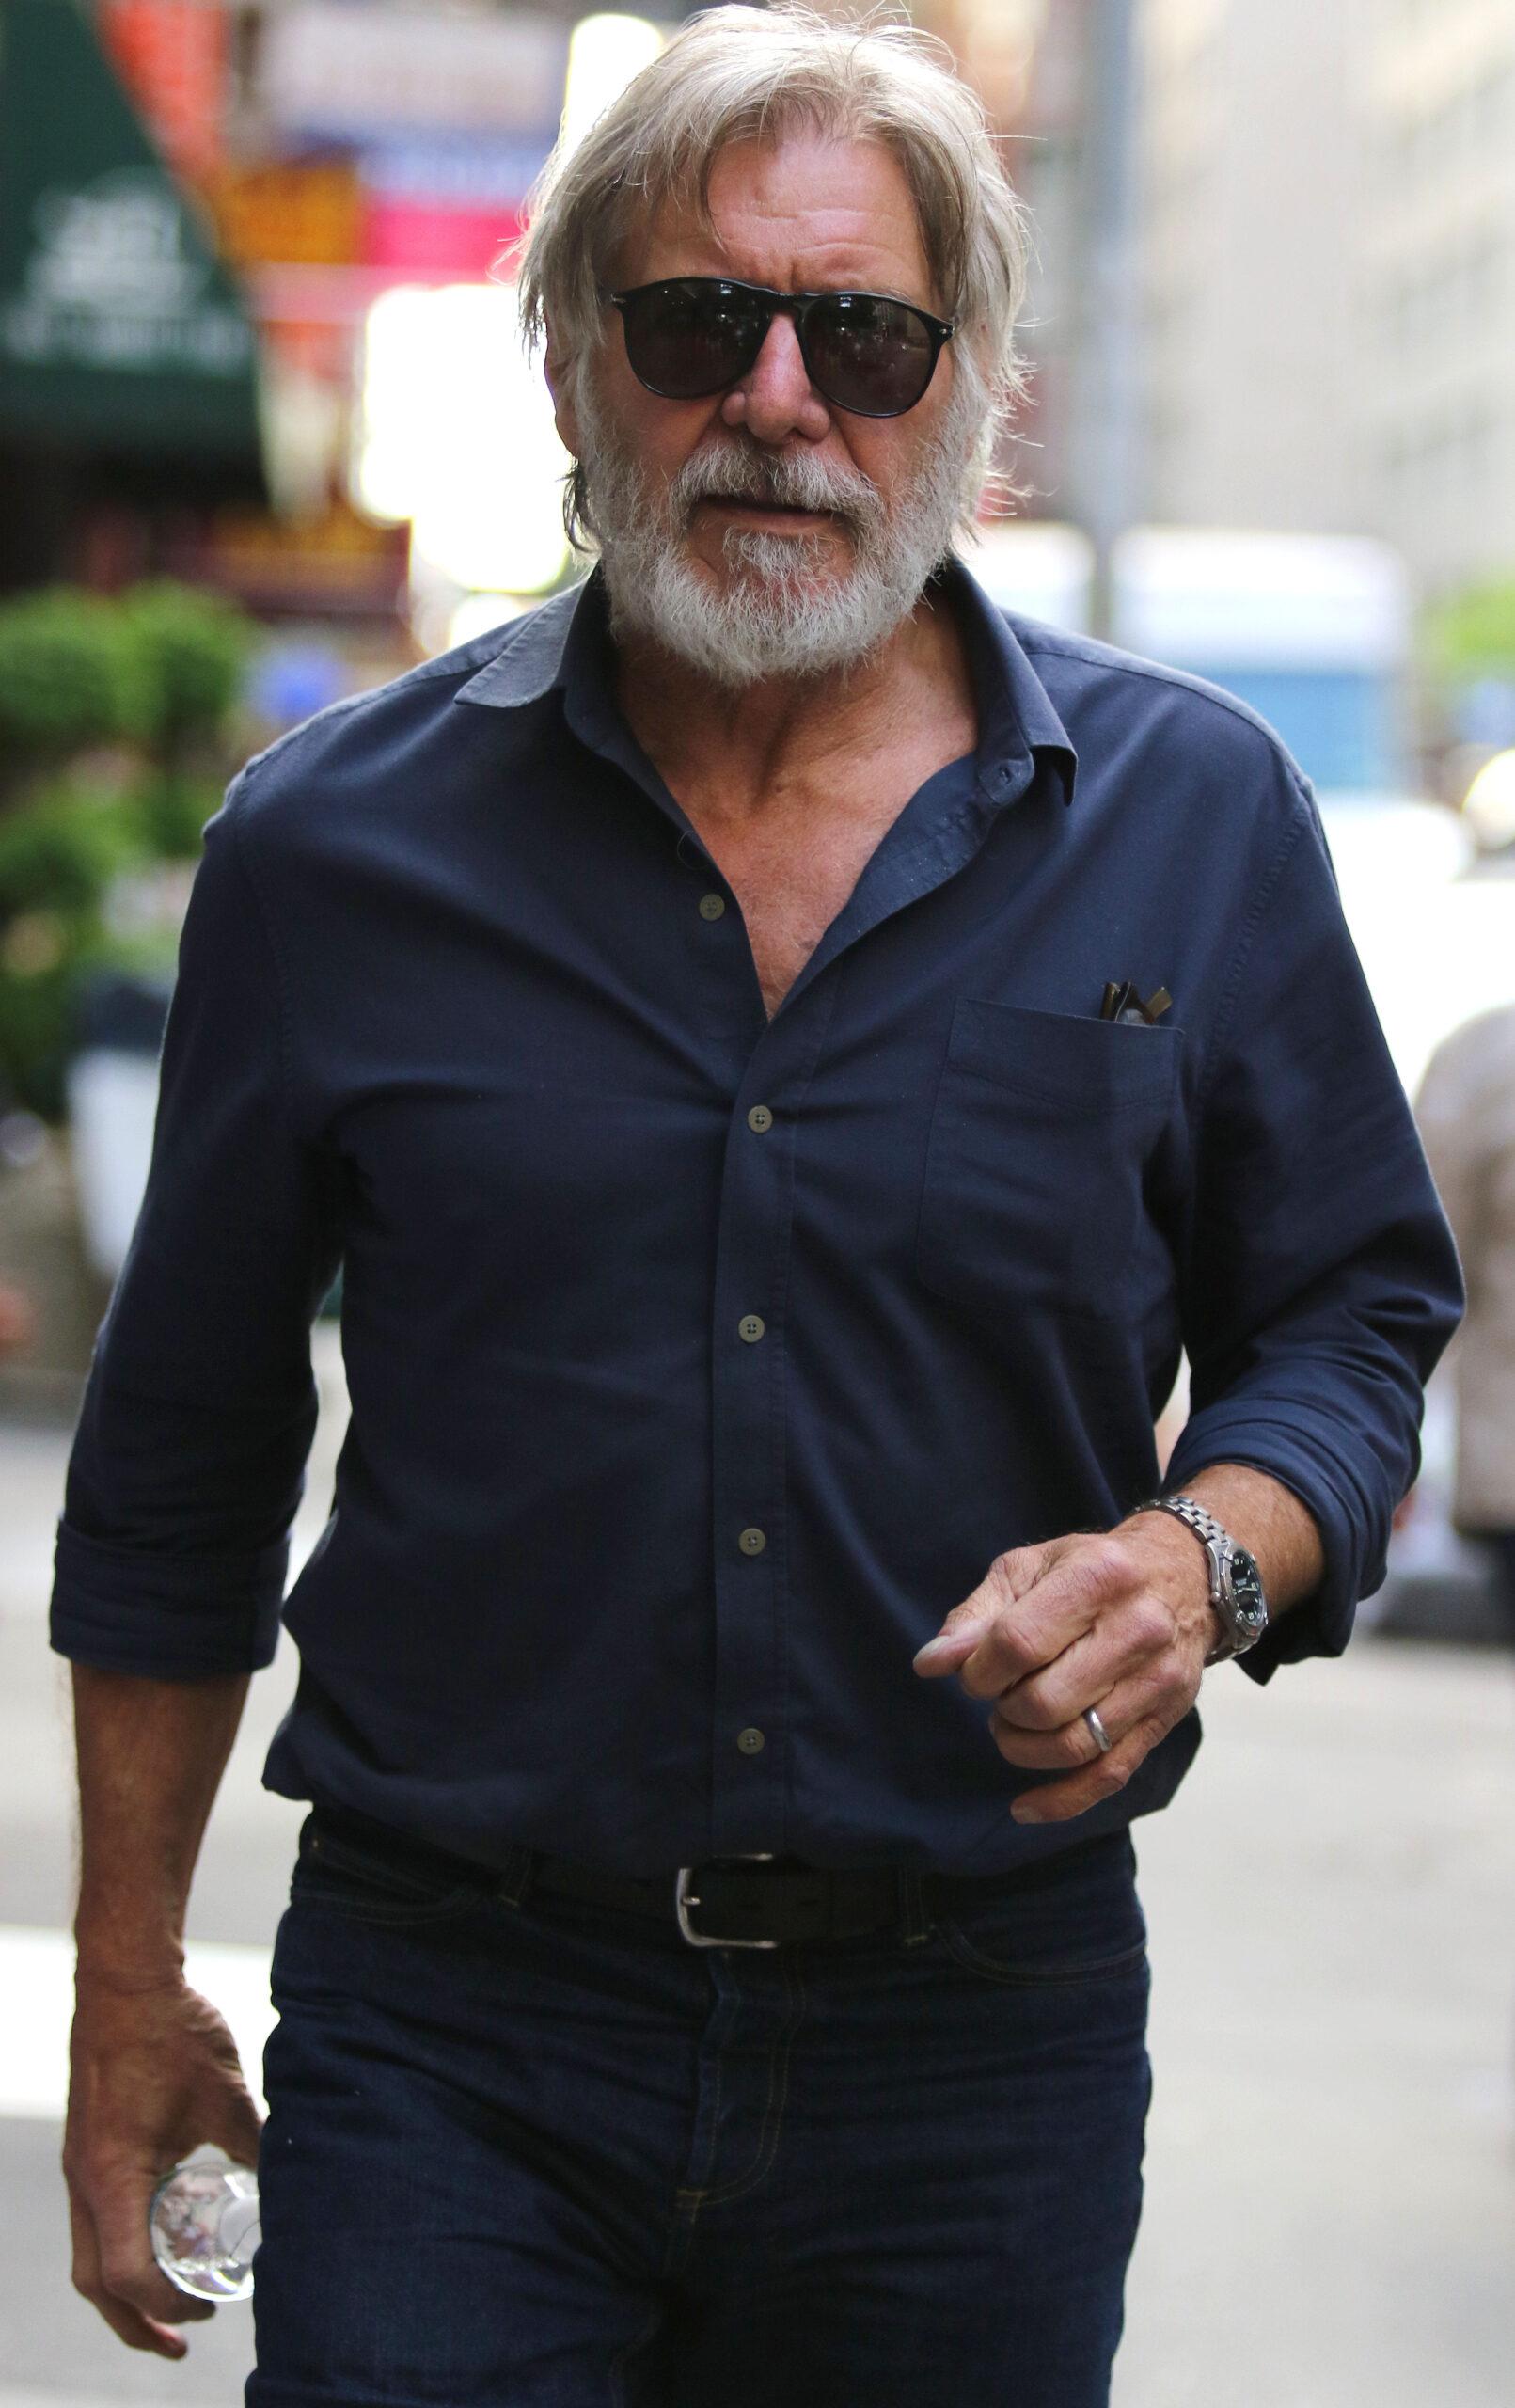 Harrison Ford looks nearly unrecognizable sporting a scruffy white beard in New York City